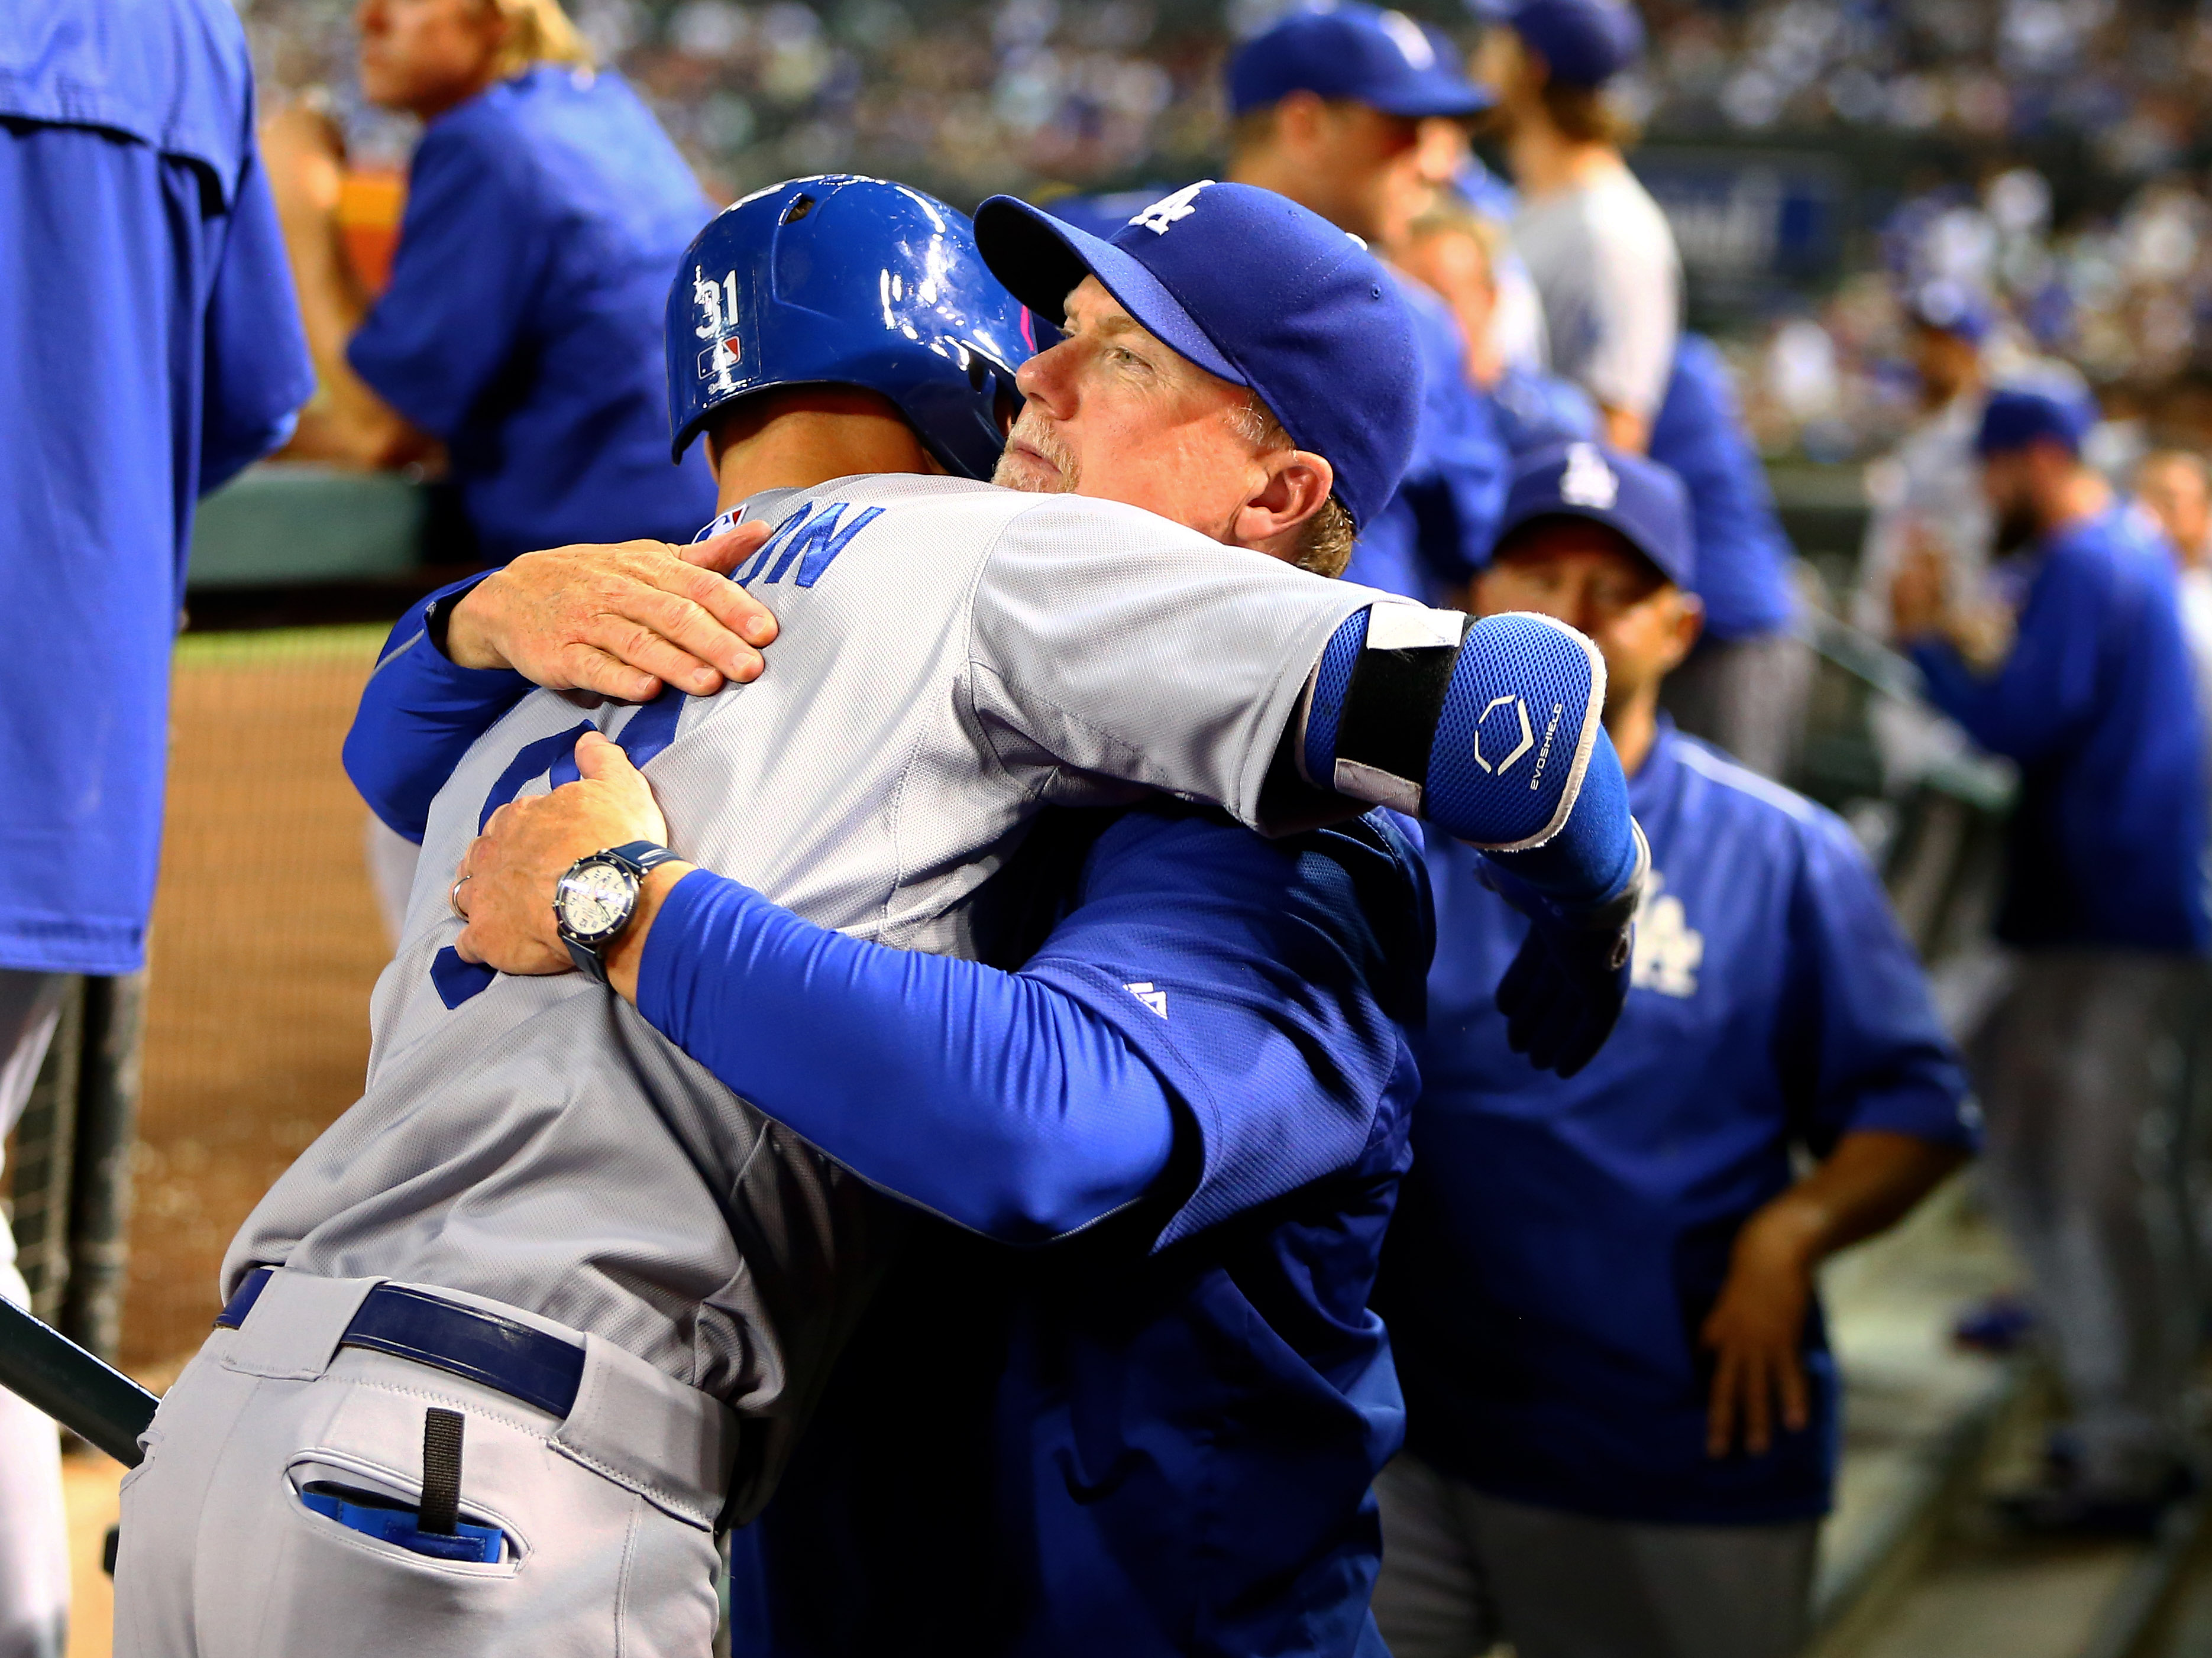 1992 Home Run Derby champion and seven-time derby participant Mark McGwire passes along his power to Joc Pederson.